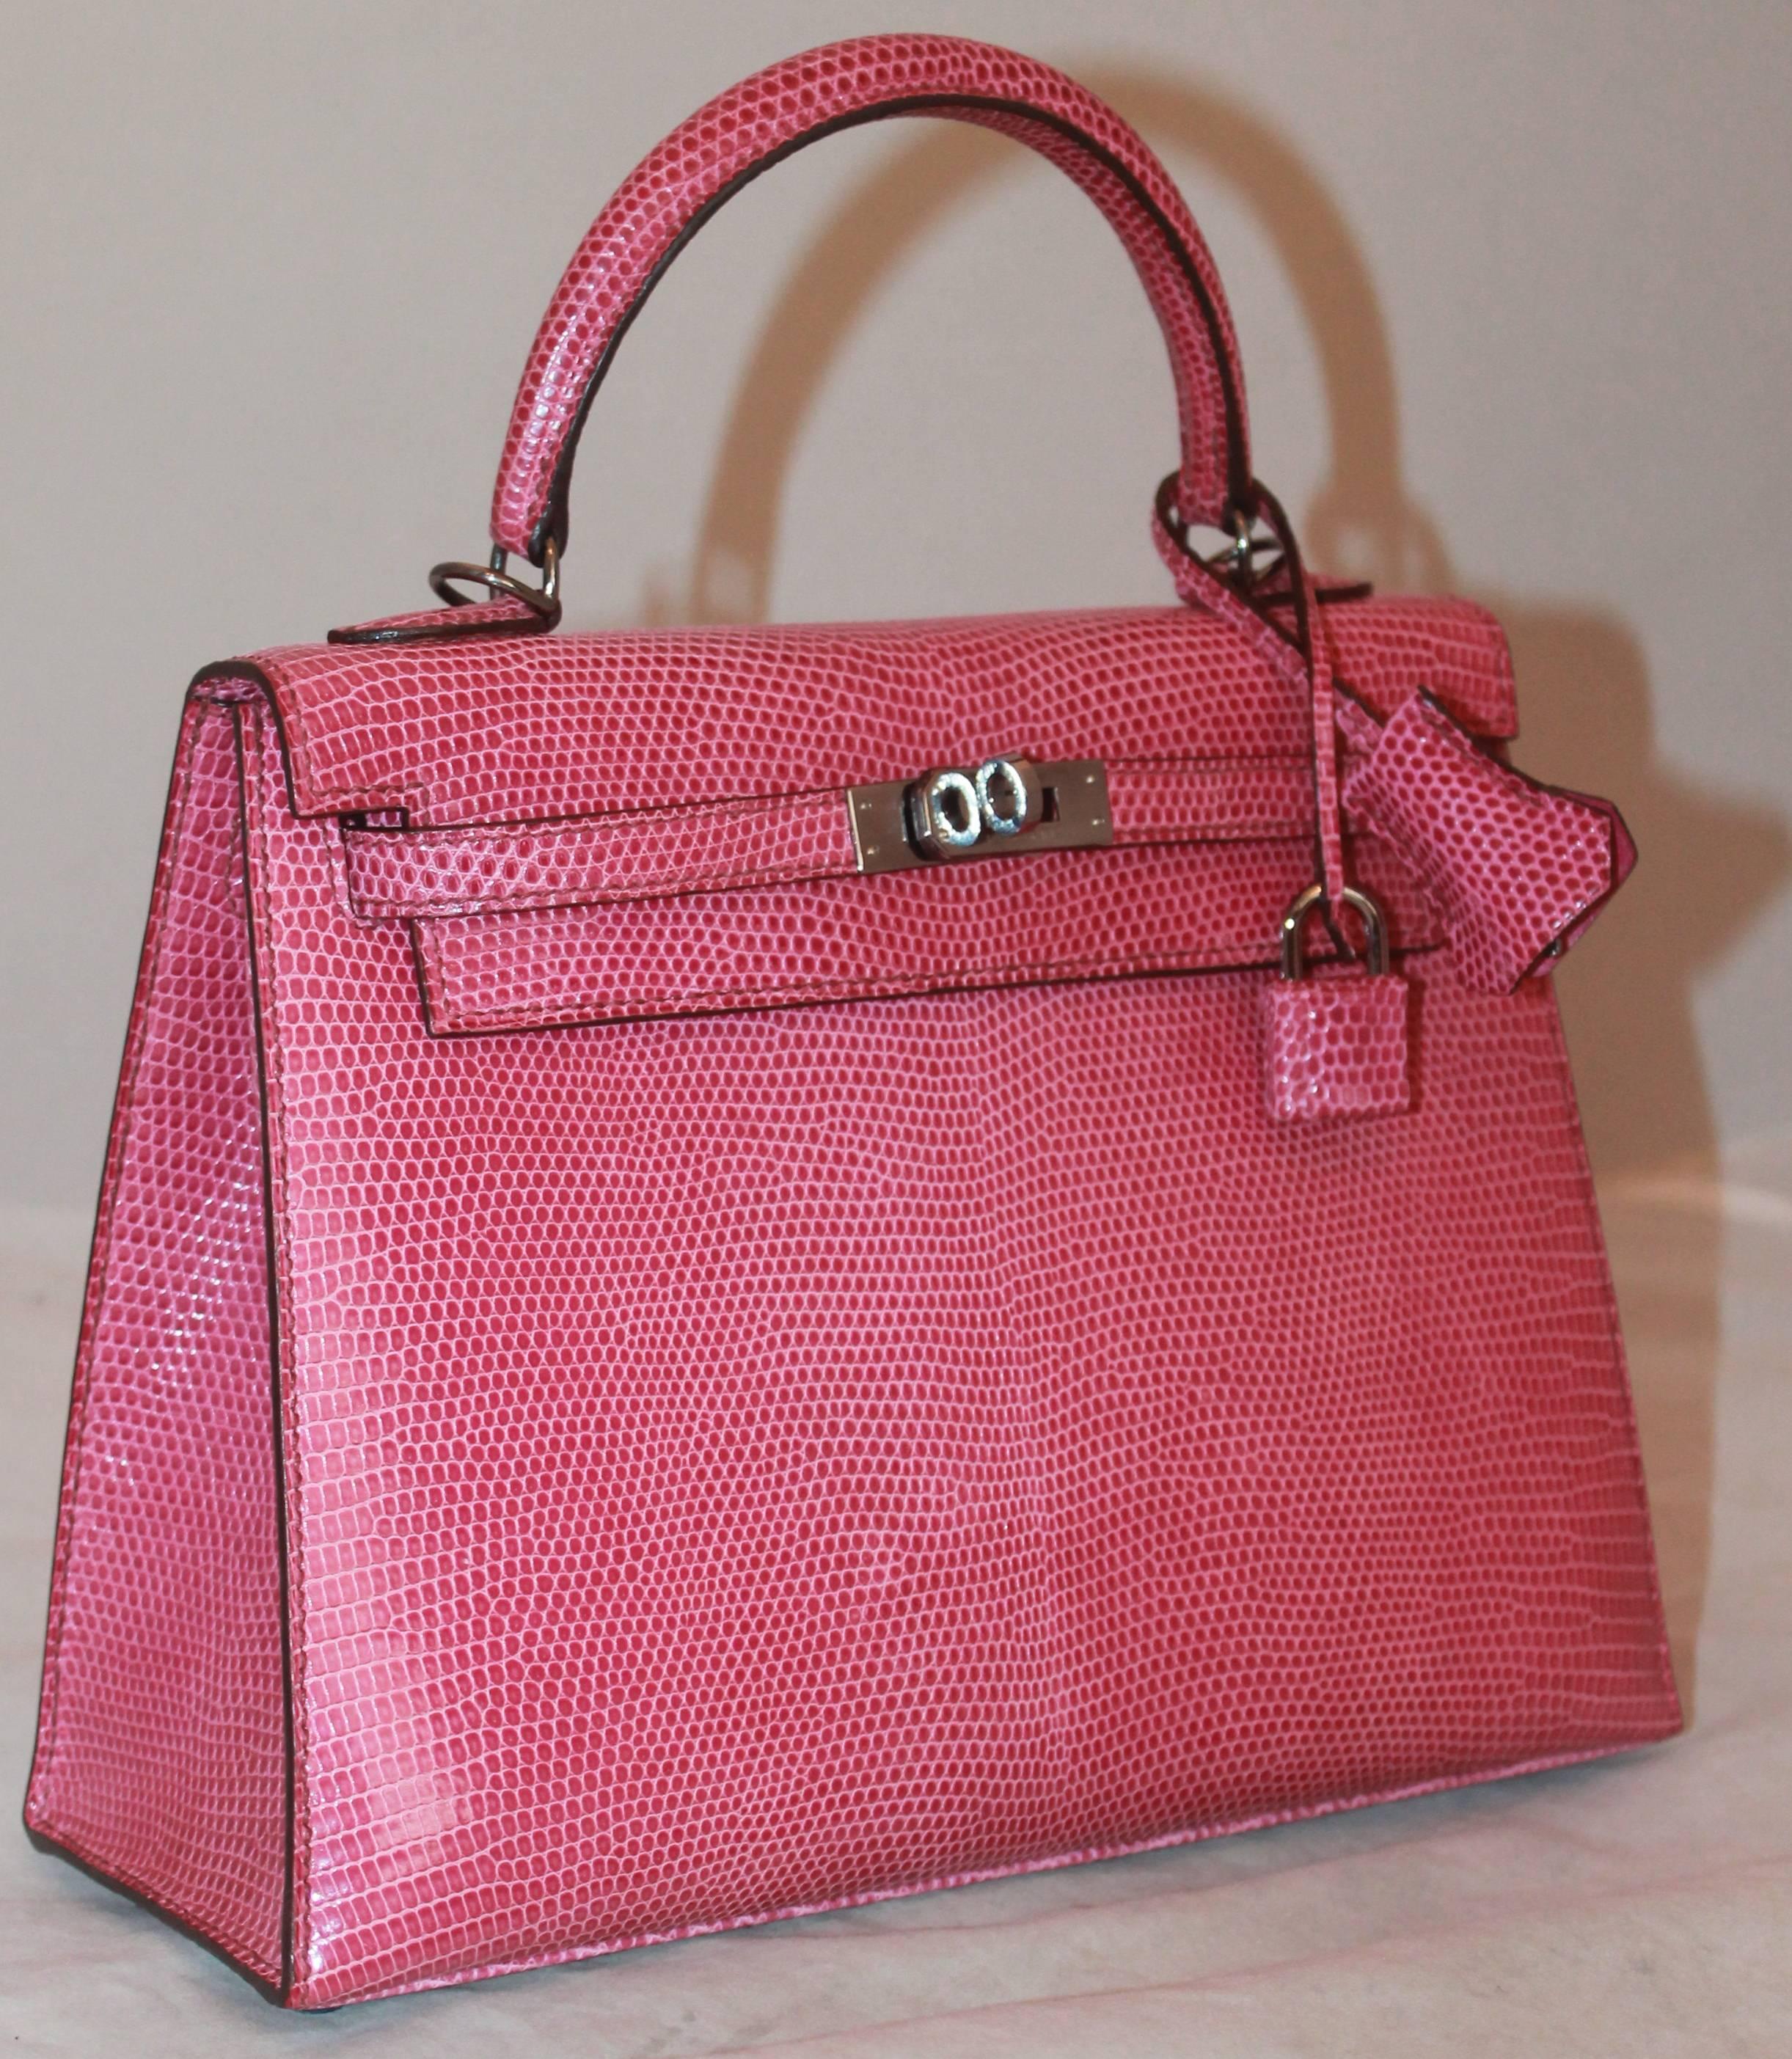 Hermes Pink Lizard Kelly w/ Lock & Key & Detachable Strap - 25cm - SHW.  This gorgeous Hermes Kelly is in excellent condition with only a slightly lighter spot on the front.  It features a gorgeous pink dyed lizard skin exterior, a lock and key, a